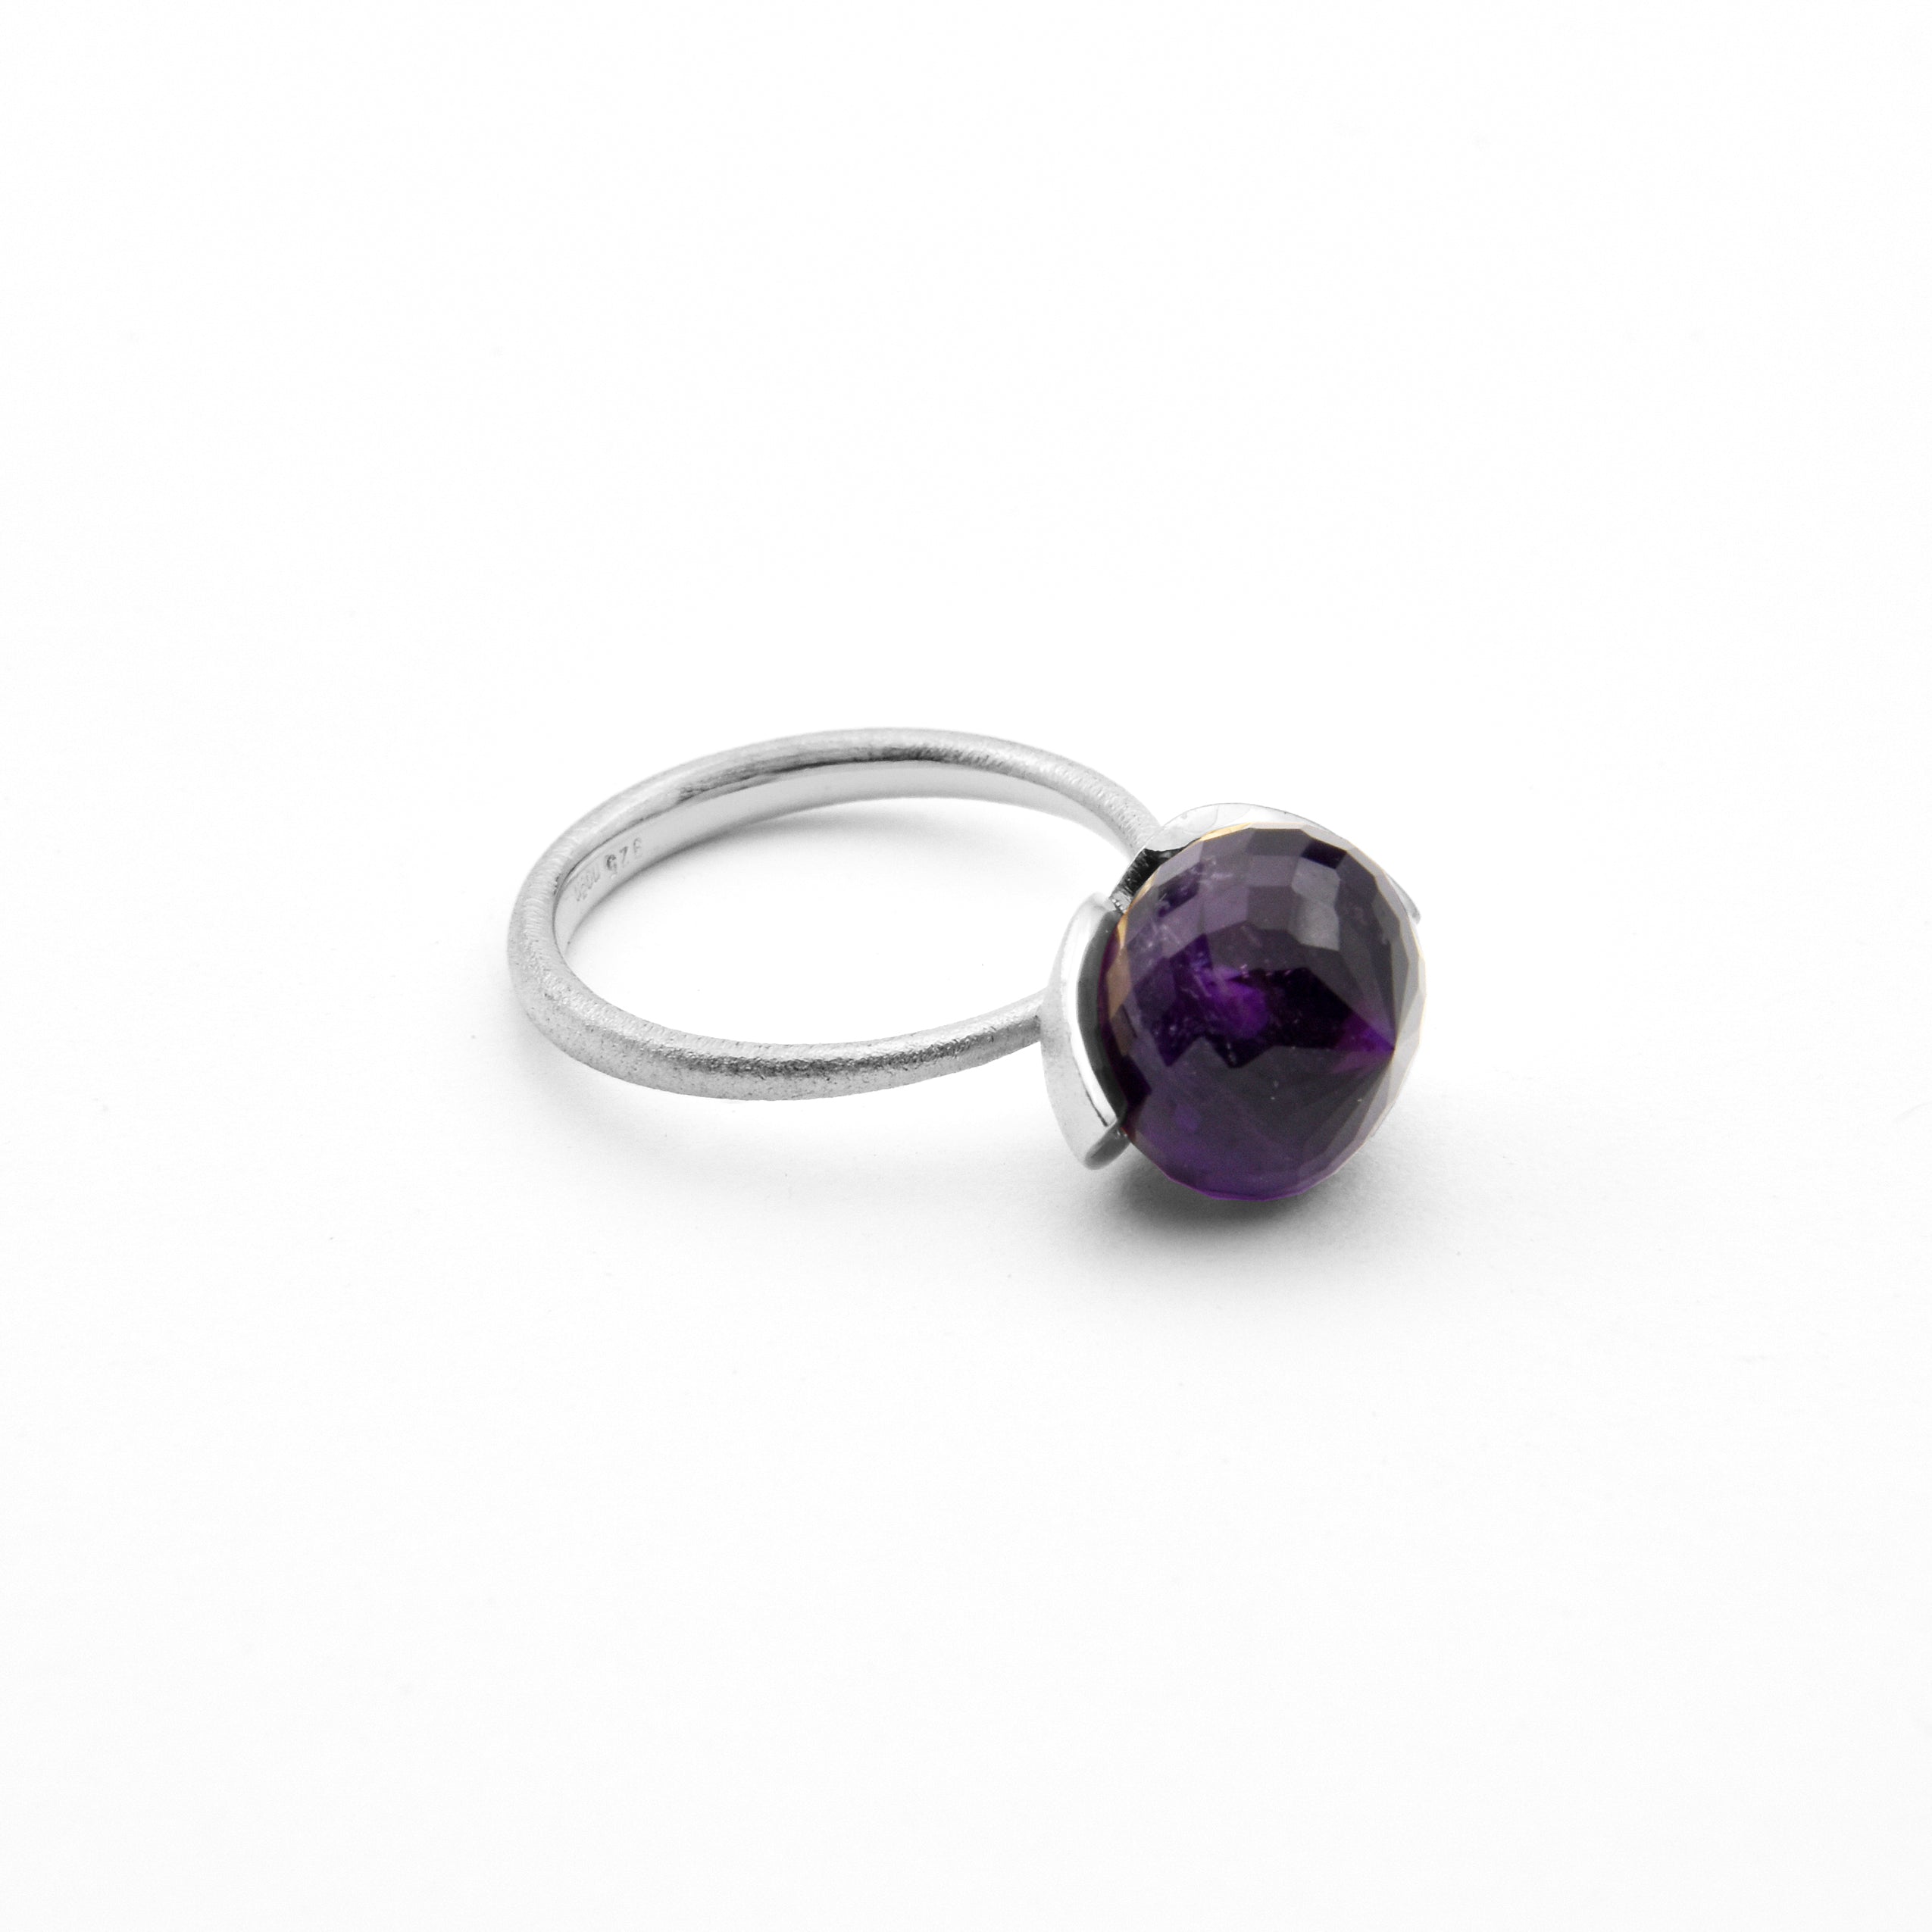 Dolce ring "medium" with amethyst 925/-